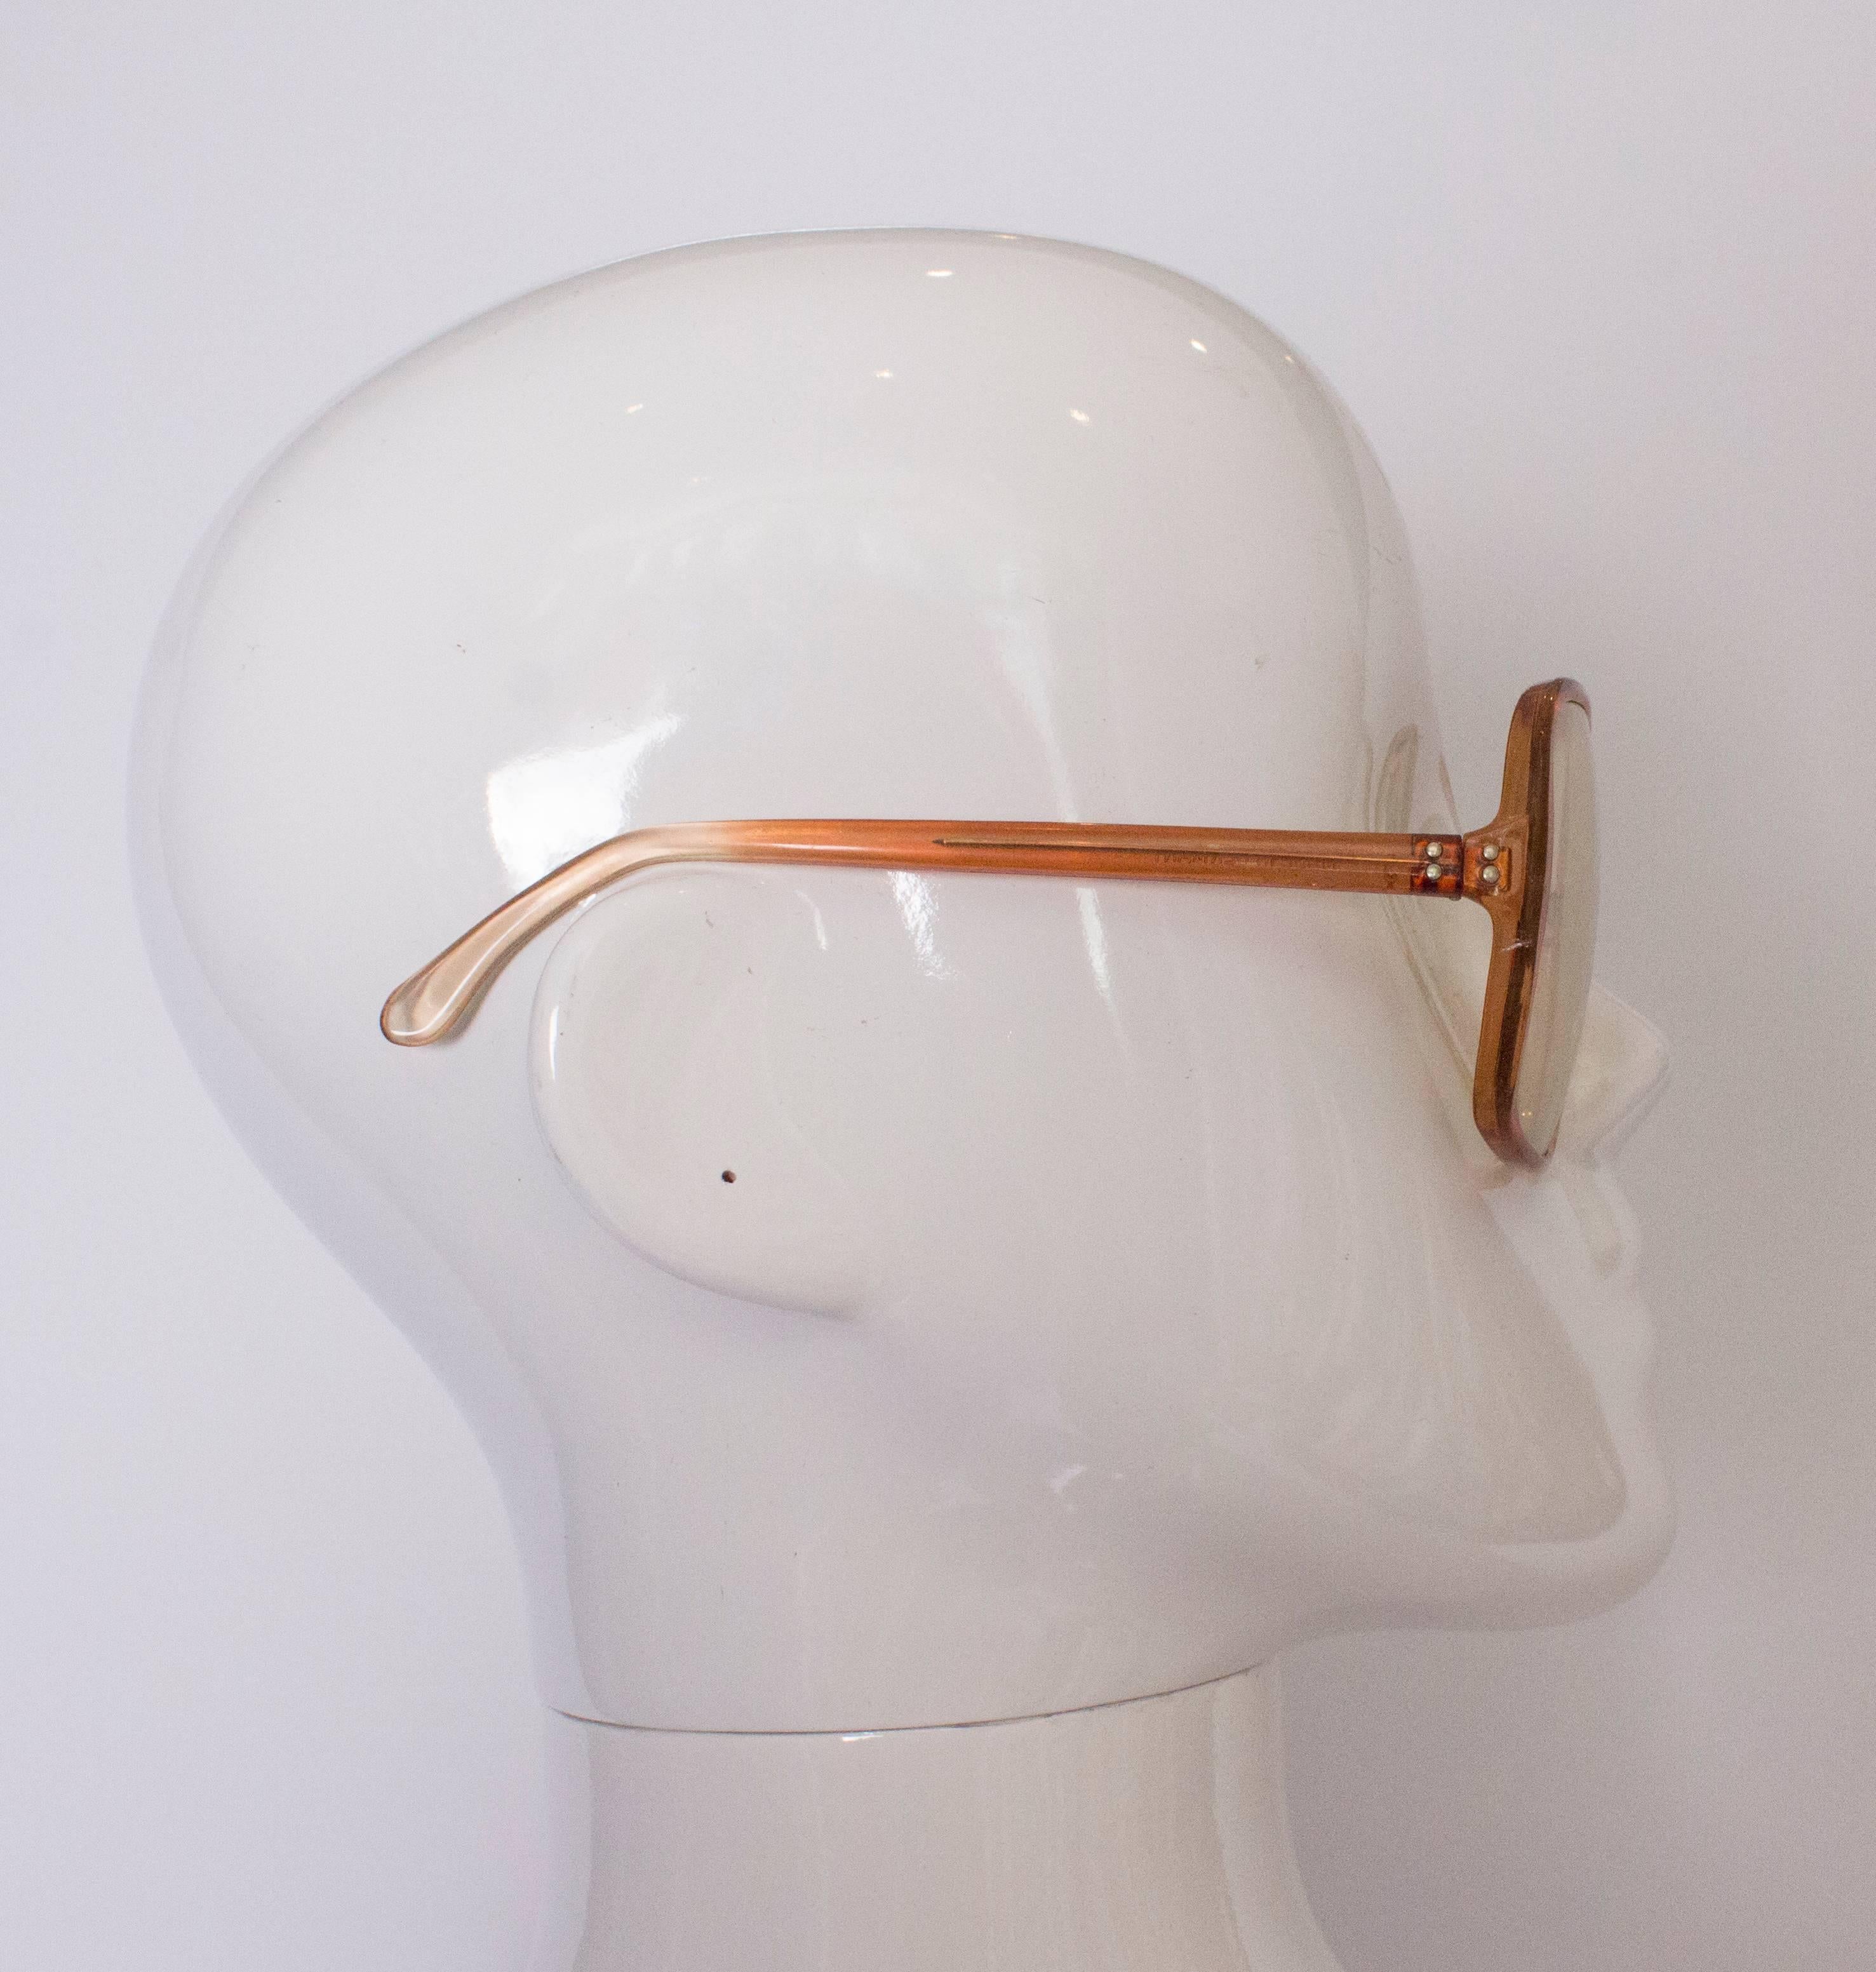 A great pair of 1970's sunglasses, they have a bronze /red colour frame and slightly tinted lense.